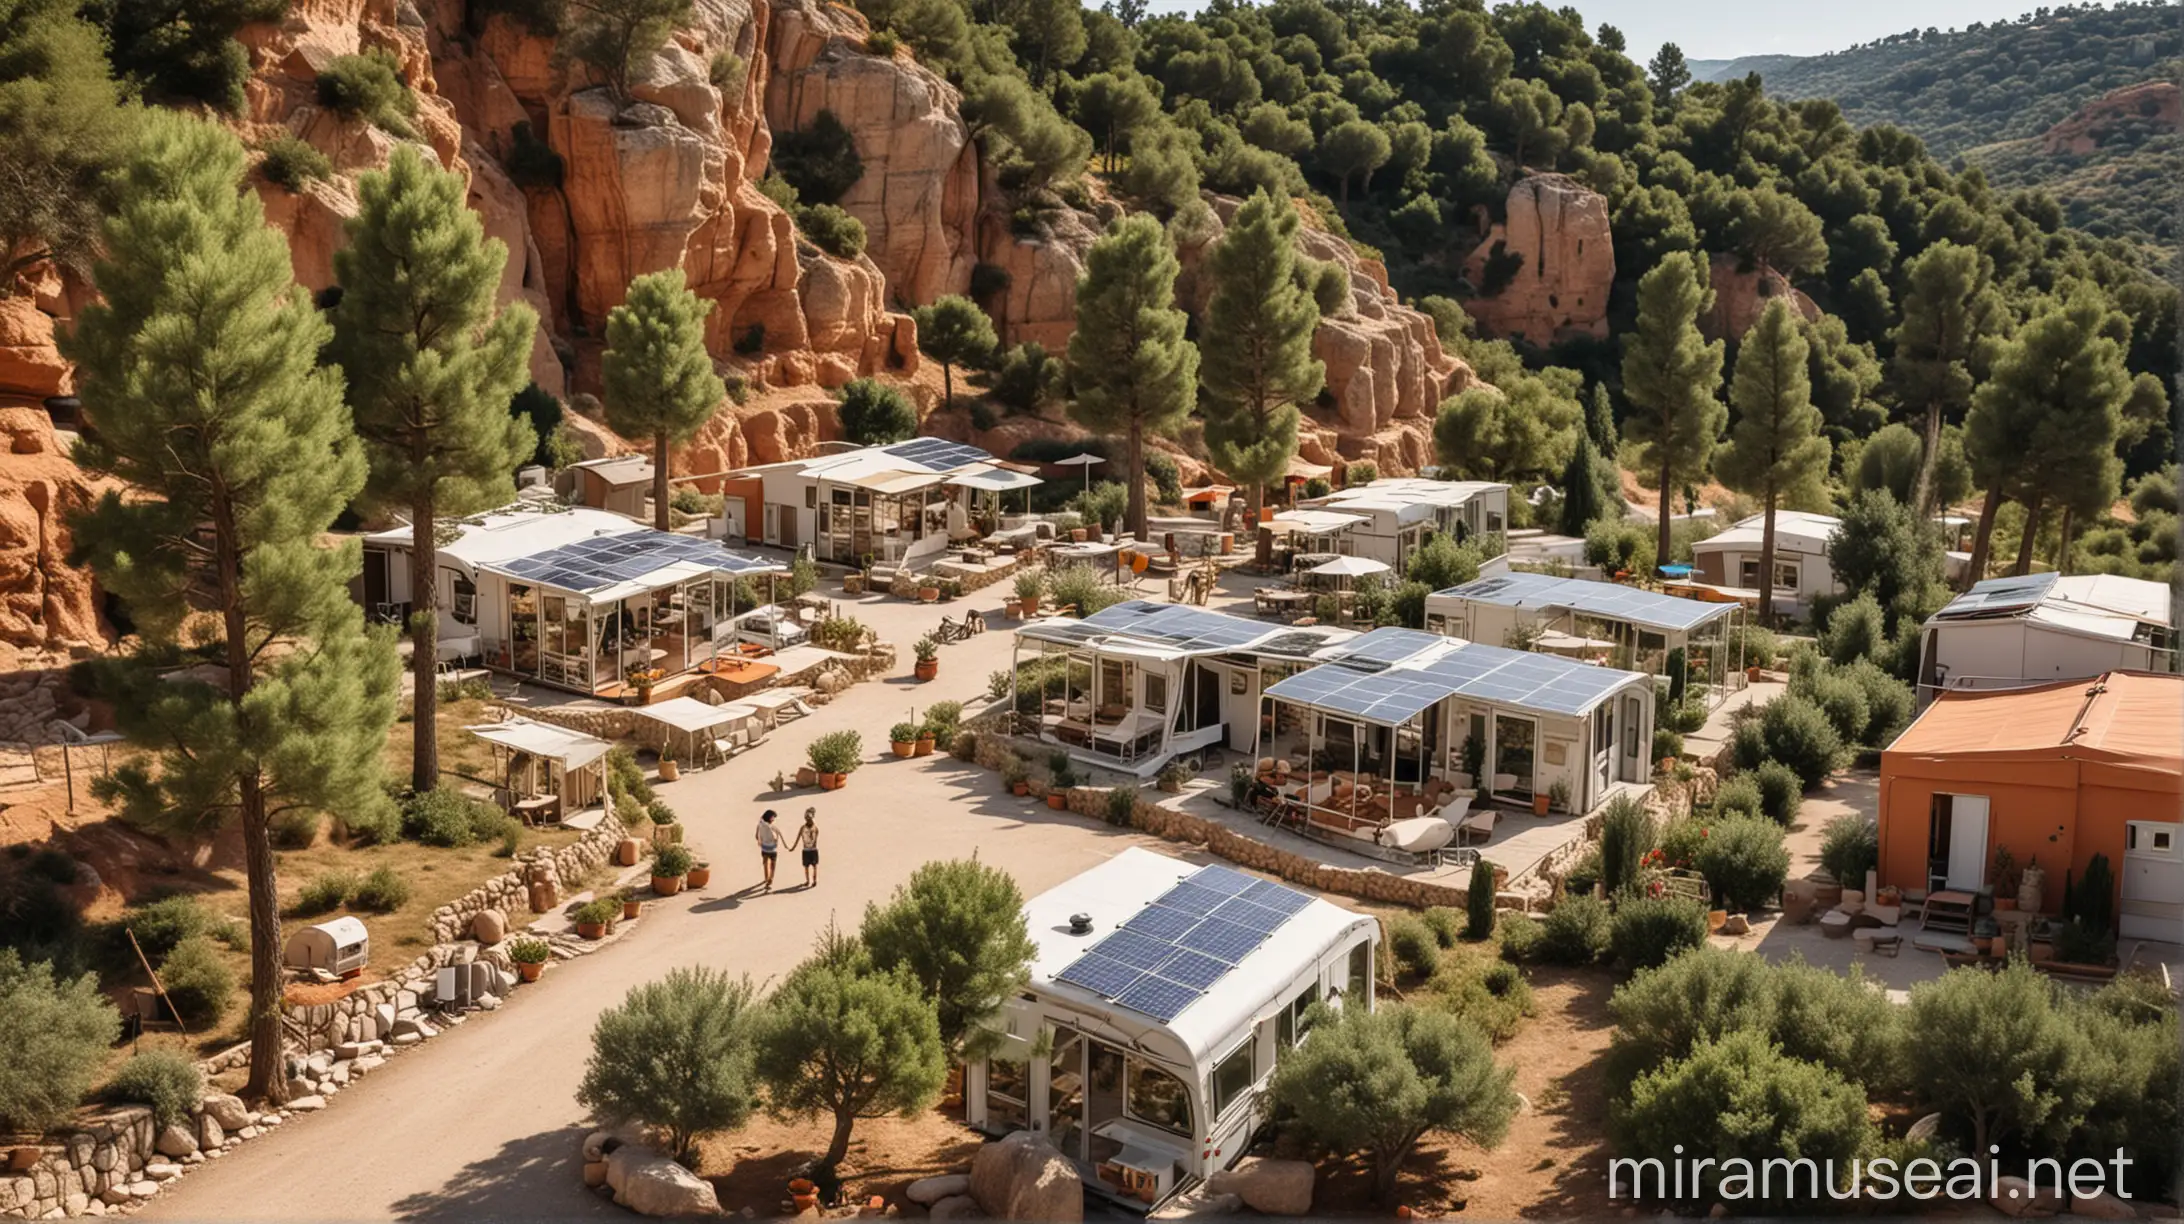 Visualize a camping site that's eco-friendly, set in a Mediterranean area. It has rocky ground with lots of green plants around. There are motorhomes and bungalows with white walls and terracotta roofs, and they all have solar panels. The bungalows are placed in a random pattern and are near tall pine trees that give lots of shade. In the middle of the site, there's a big coworking space made of glass walls and a terracotta roof, also with solar panels. This coworking area helps people mingle and relax. The paths in the camping site curve naturally, they aren't straight, and are edged with pebbles and wild herbs. There are also olive, cypress, and pine trees around that make the place cool and quiet. This place mixes a modern work style with a simple, eco-friendly way of living in a Mediterranean look.